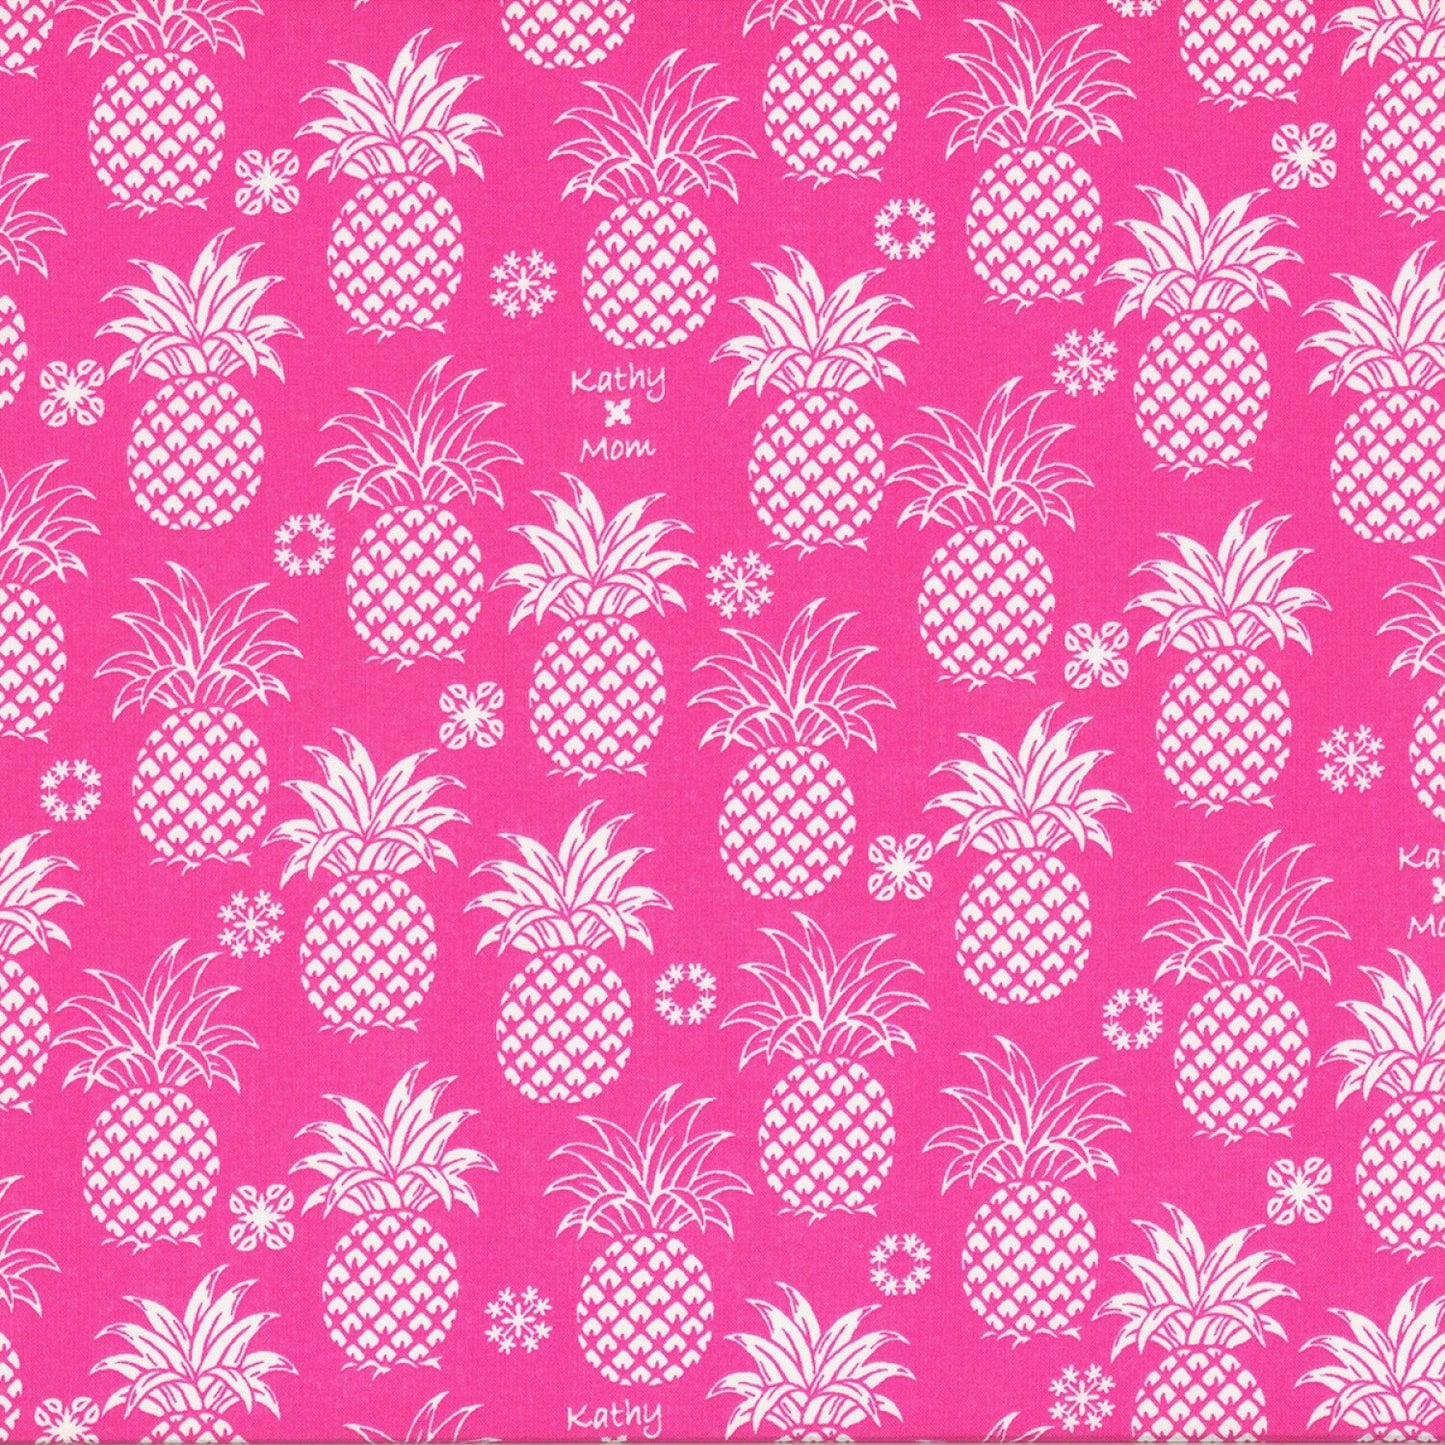 Kathy Mom 2018 Collection Pink Pineapples 20110L-21 Cotton Woven